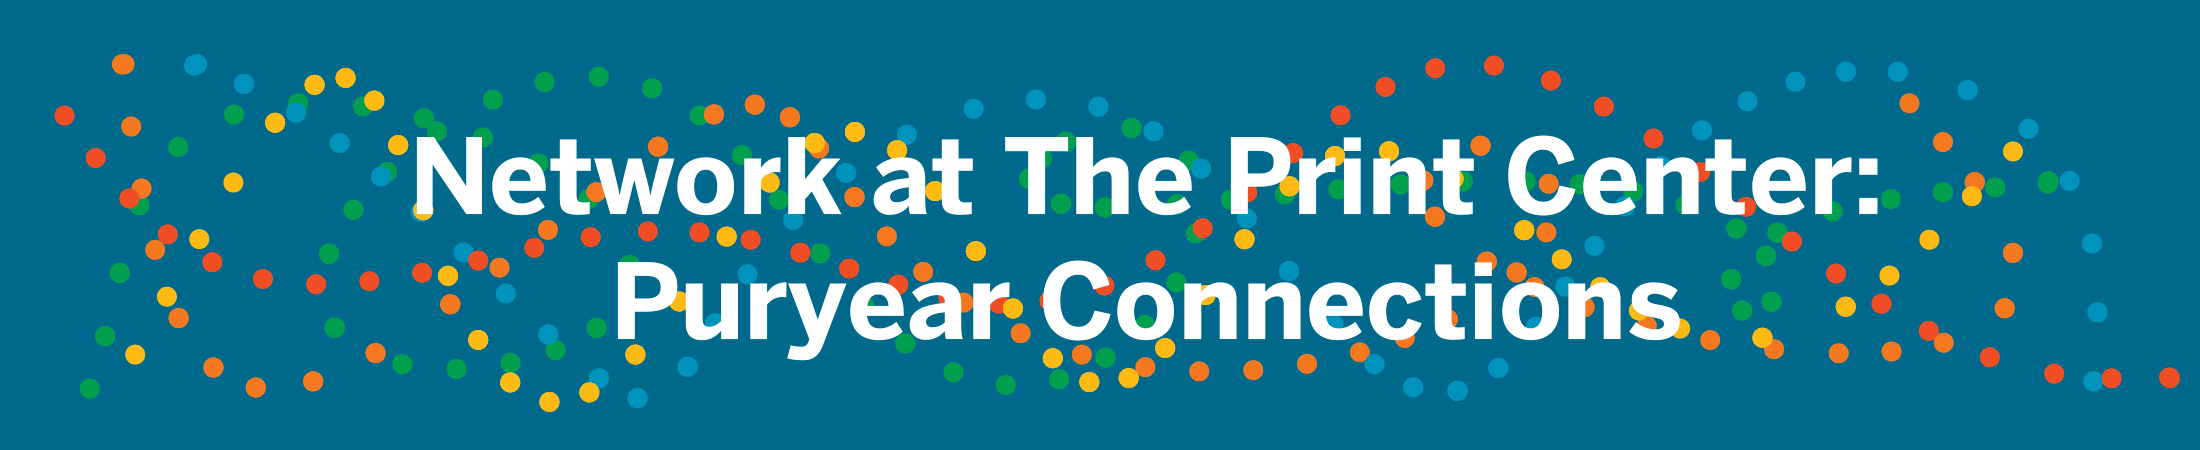 Network at the Print Center: Puryear Connections